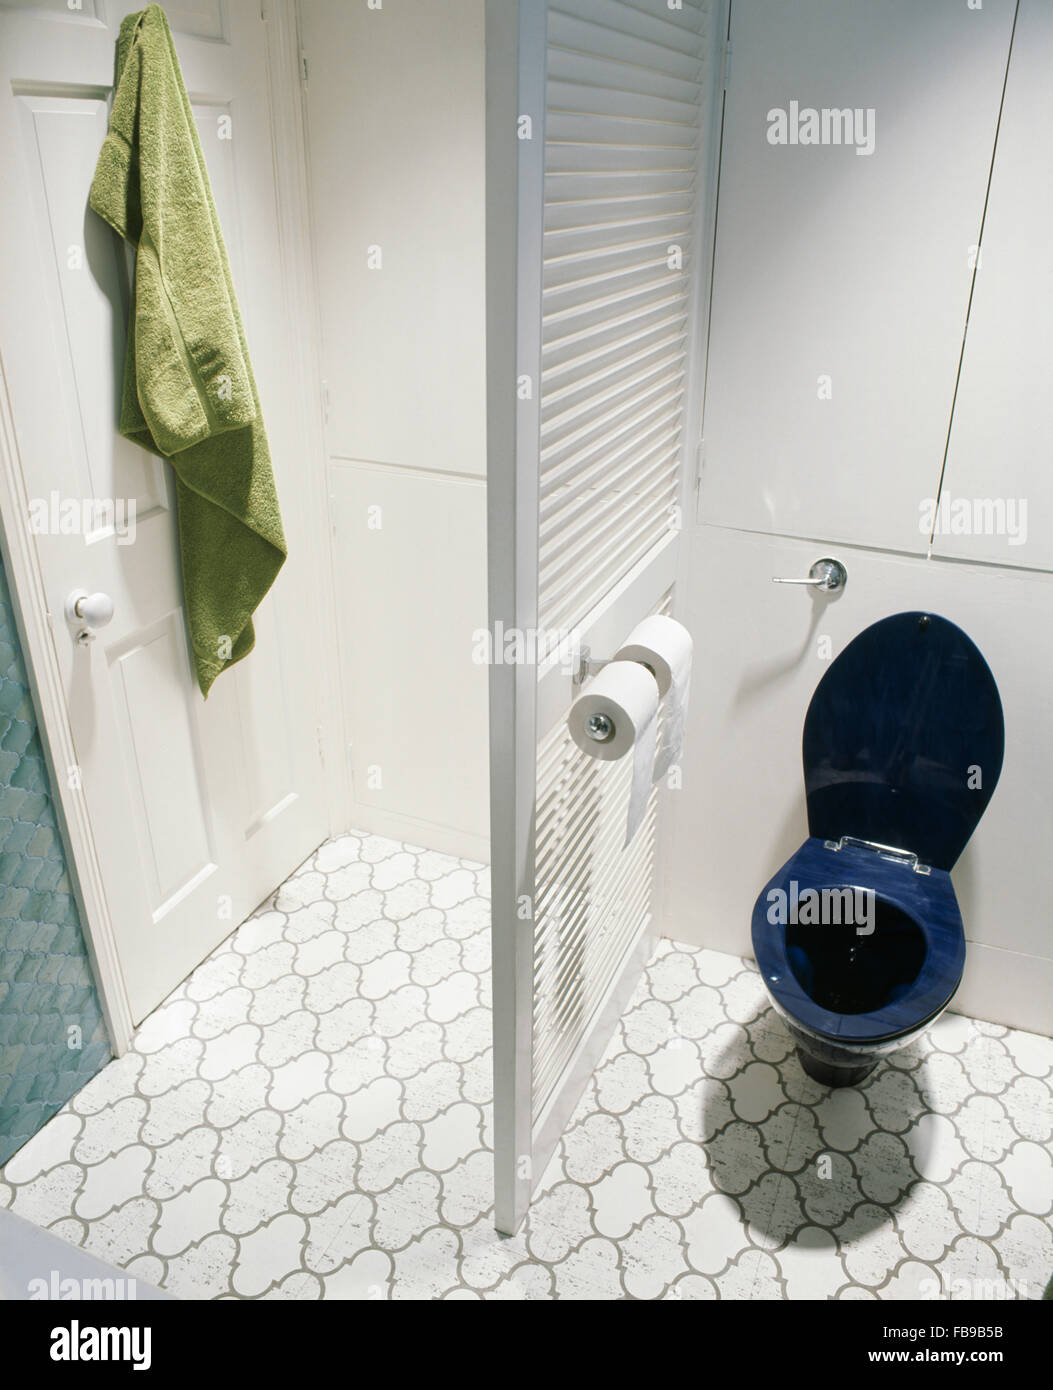 https://c8.alamy.com/comp/FB9B5B/blue-toilet-and-louvre-room-divider-in-seventies-bathroom-with-white-FB9B5B.jpg